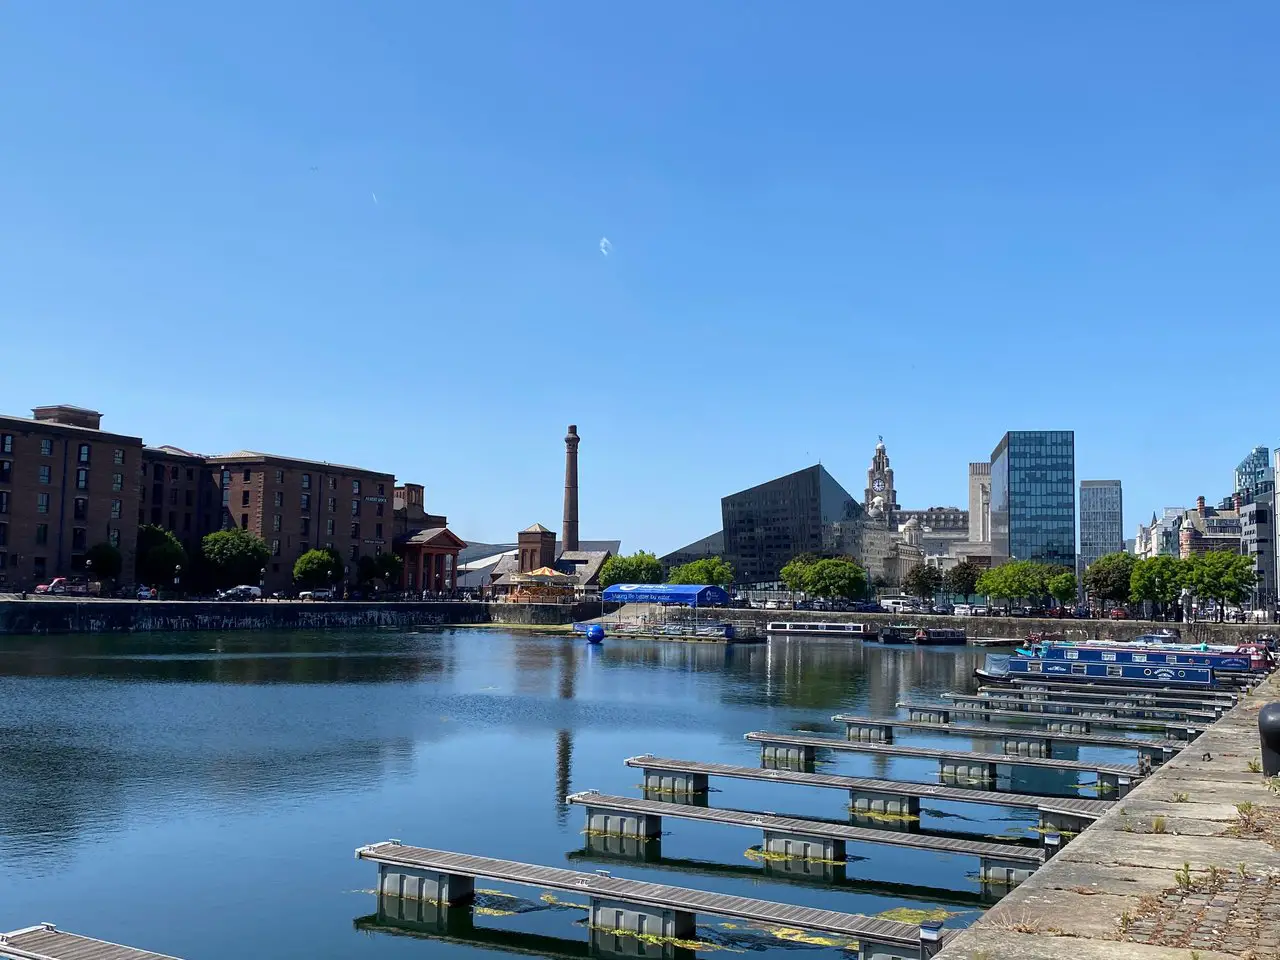 Liverpool docks on a sunny day